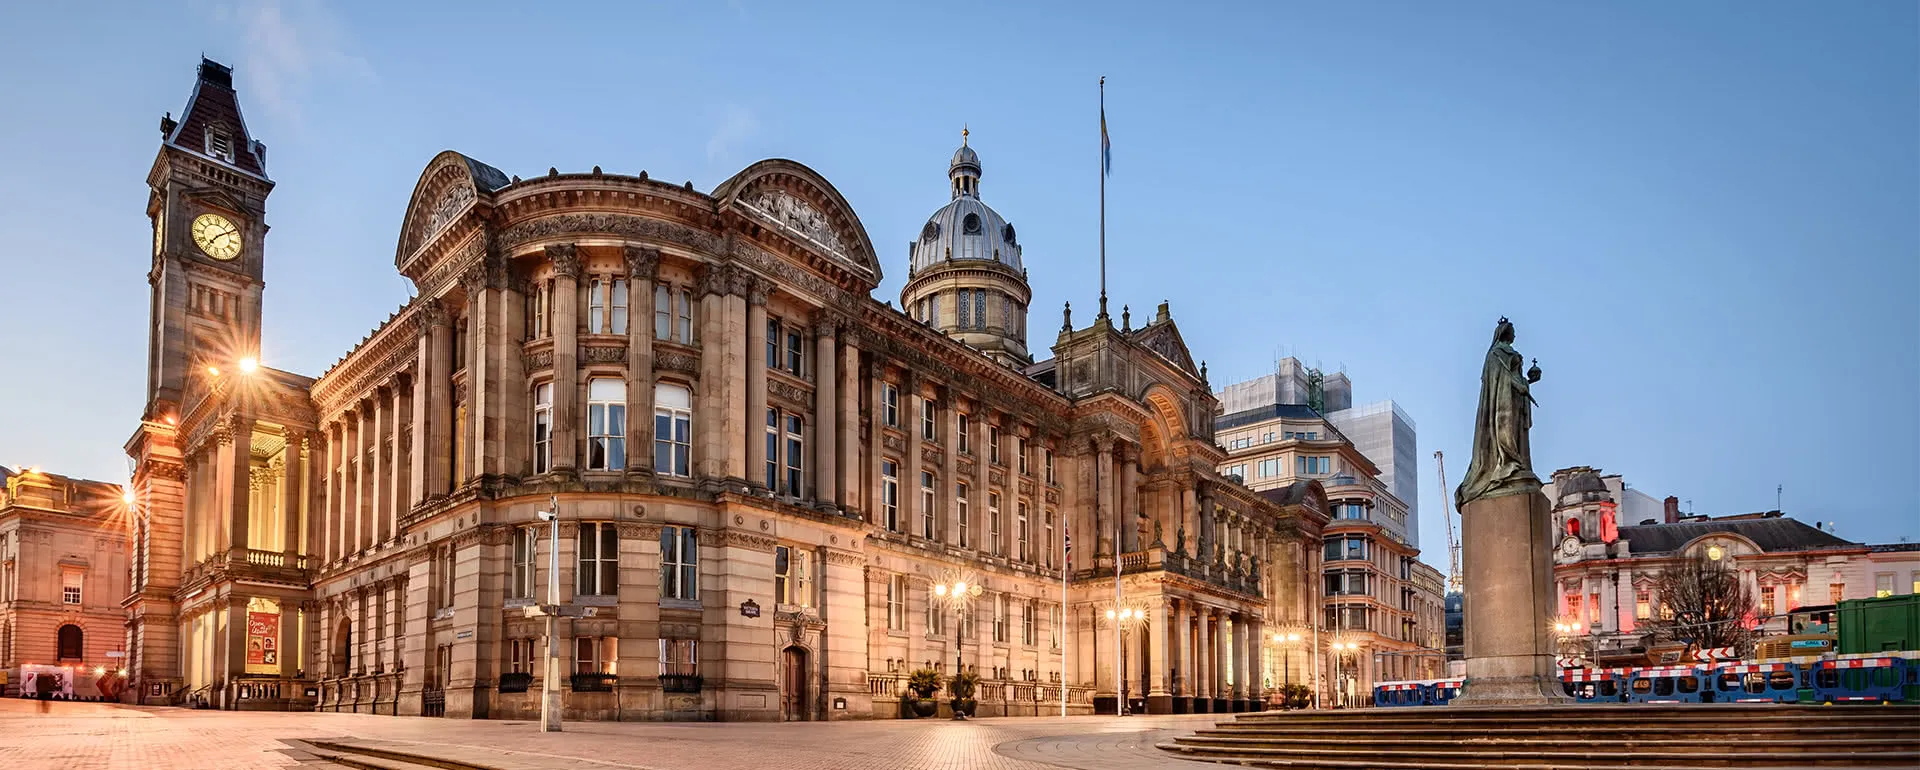 Birmingham - the destination with youth hostels